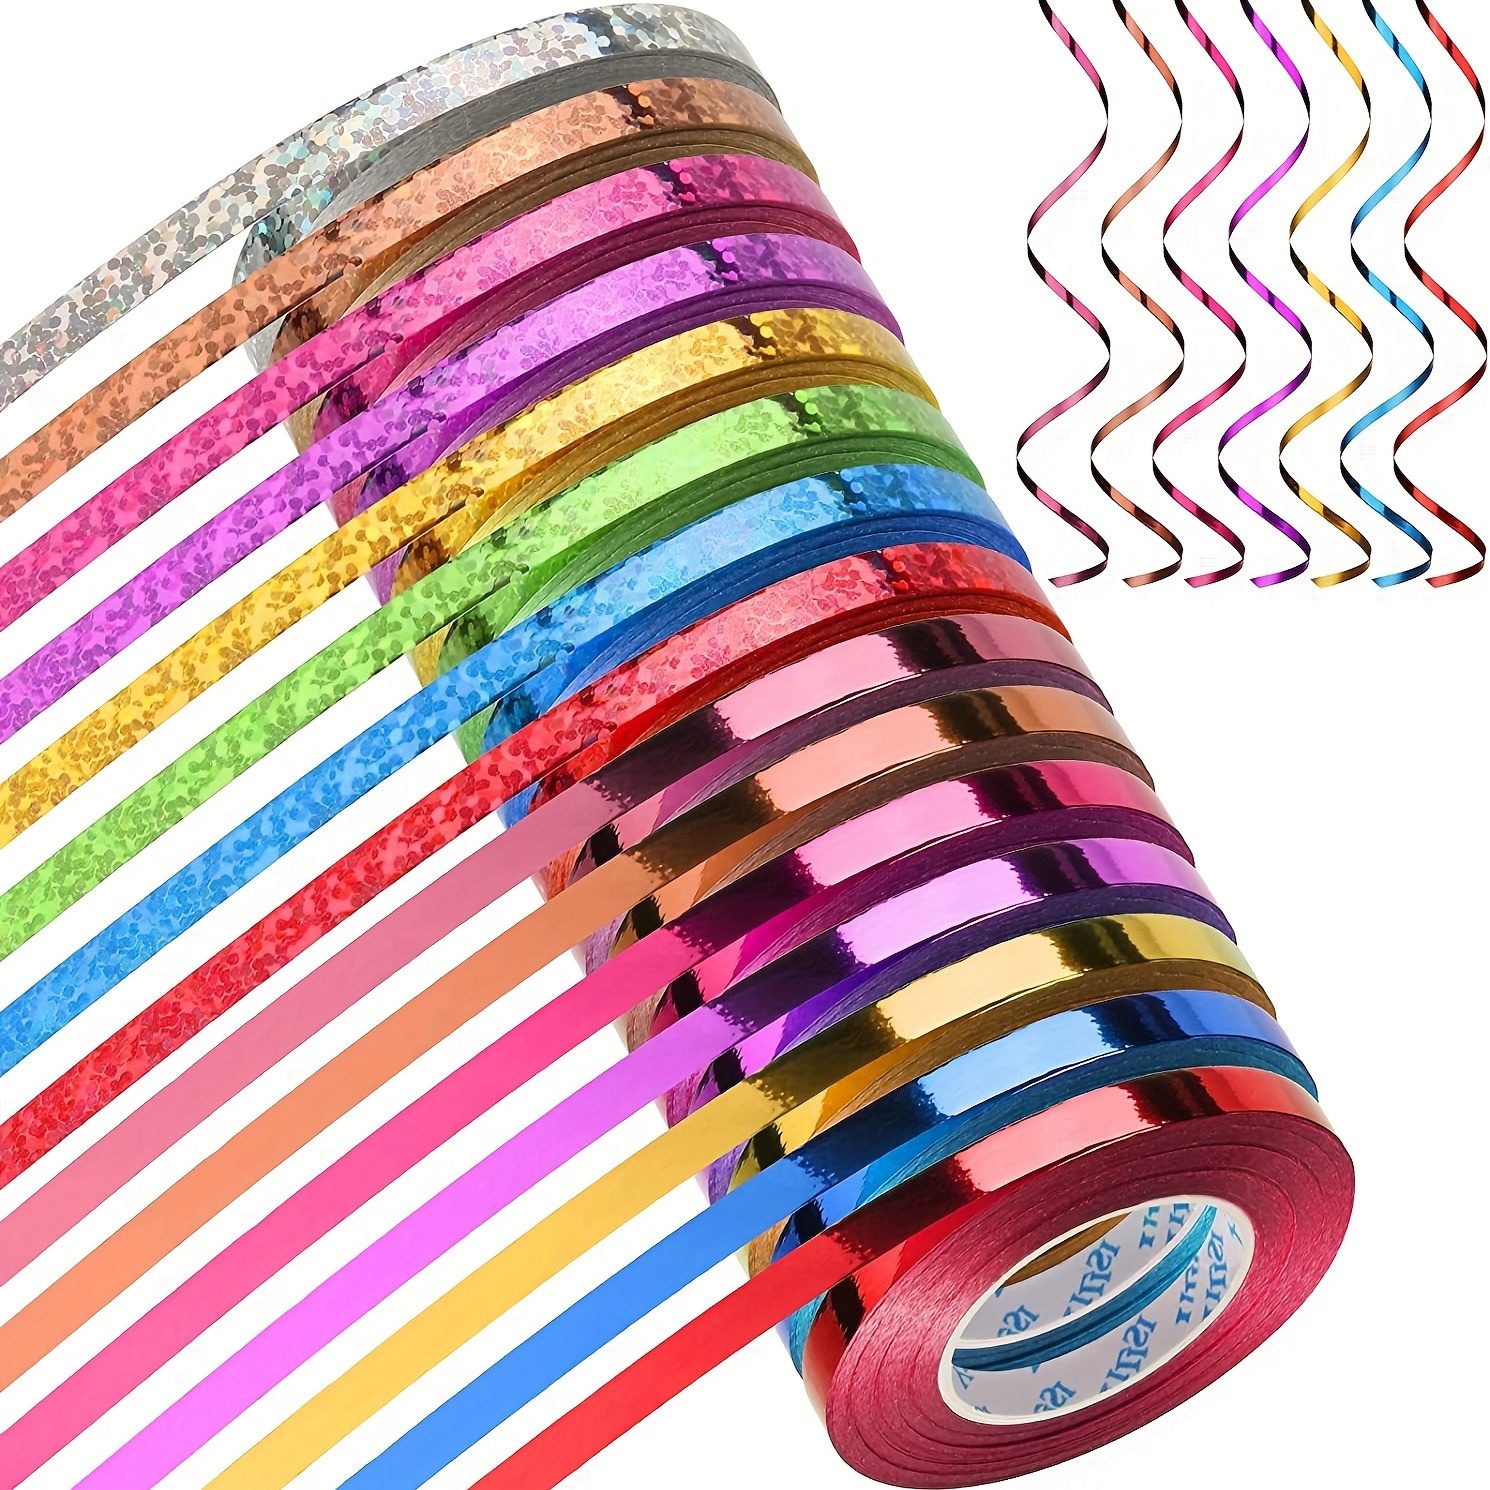 

18rolls, 11yards Curling Ribbon, Metallic Balloon String Roll Assorted Colors Wrapping Ribbons, For Crafts Bows Present Wrapping Florist Wedding Party Decoration